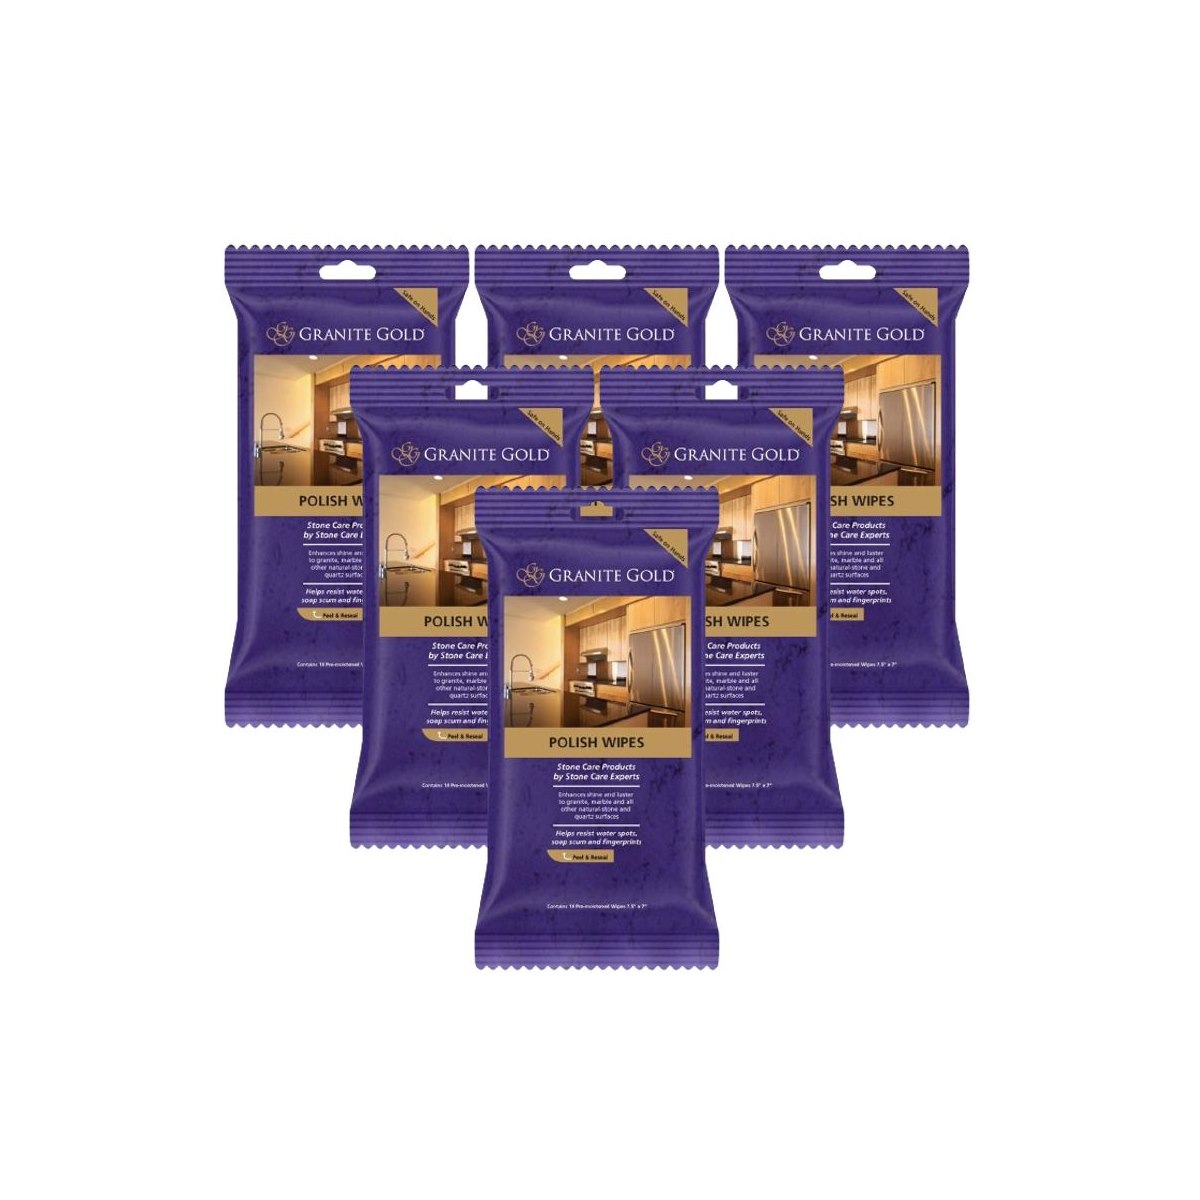 Case of 6 x Granite Gold Polish Wipes Pack of 18 Wipes